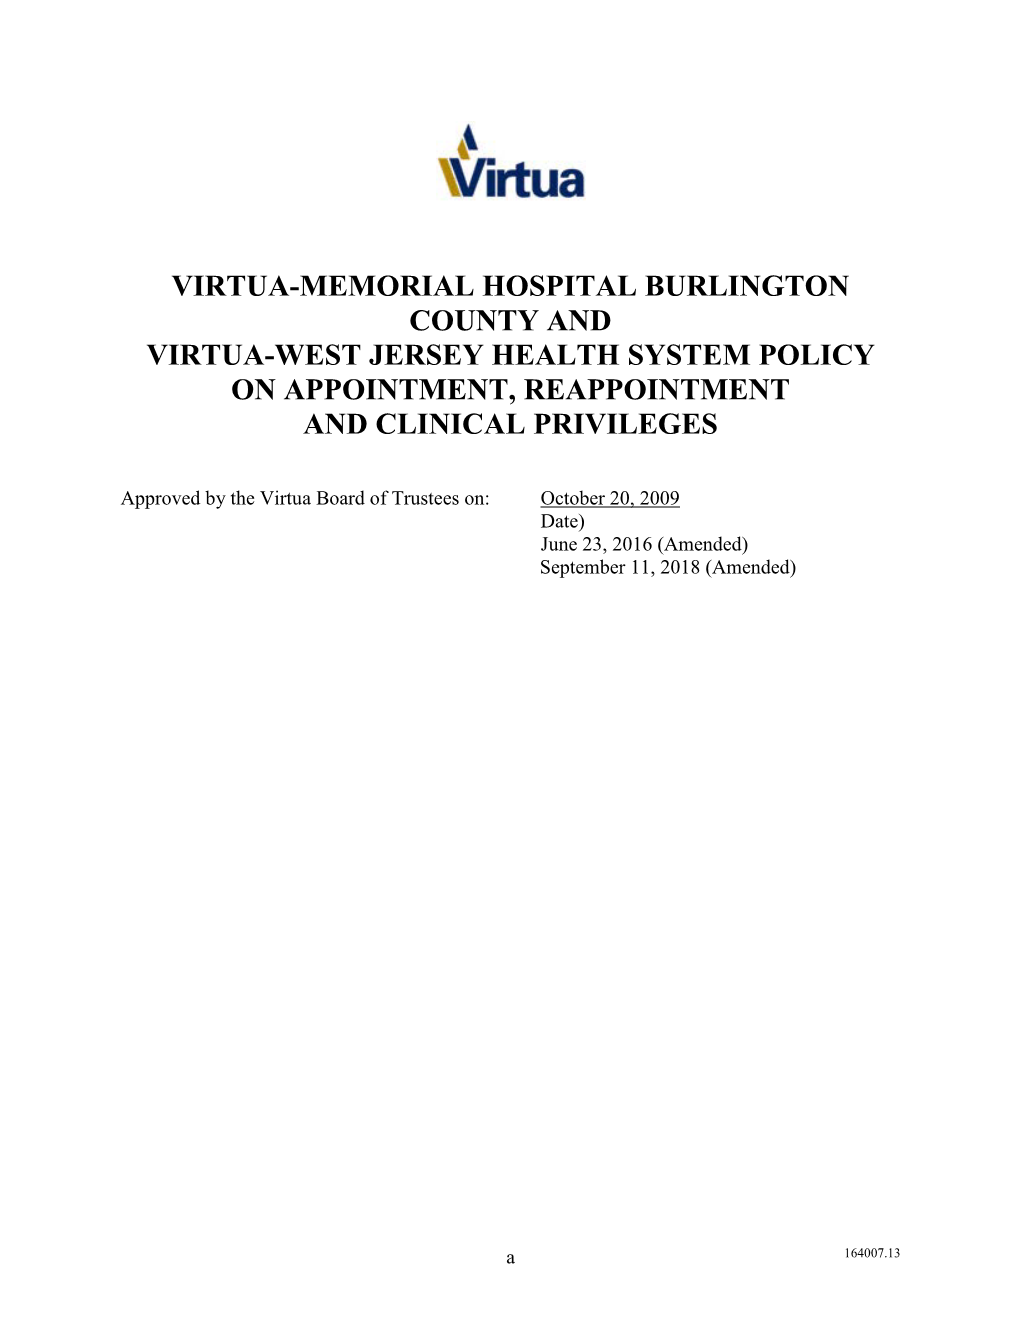 Virtua-Memorial Hospital Burlington County and Virtua-West Jersey Health System Policy on Appointment, Reappointment and Clinical Privileges